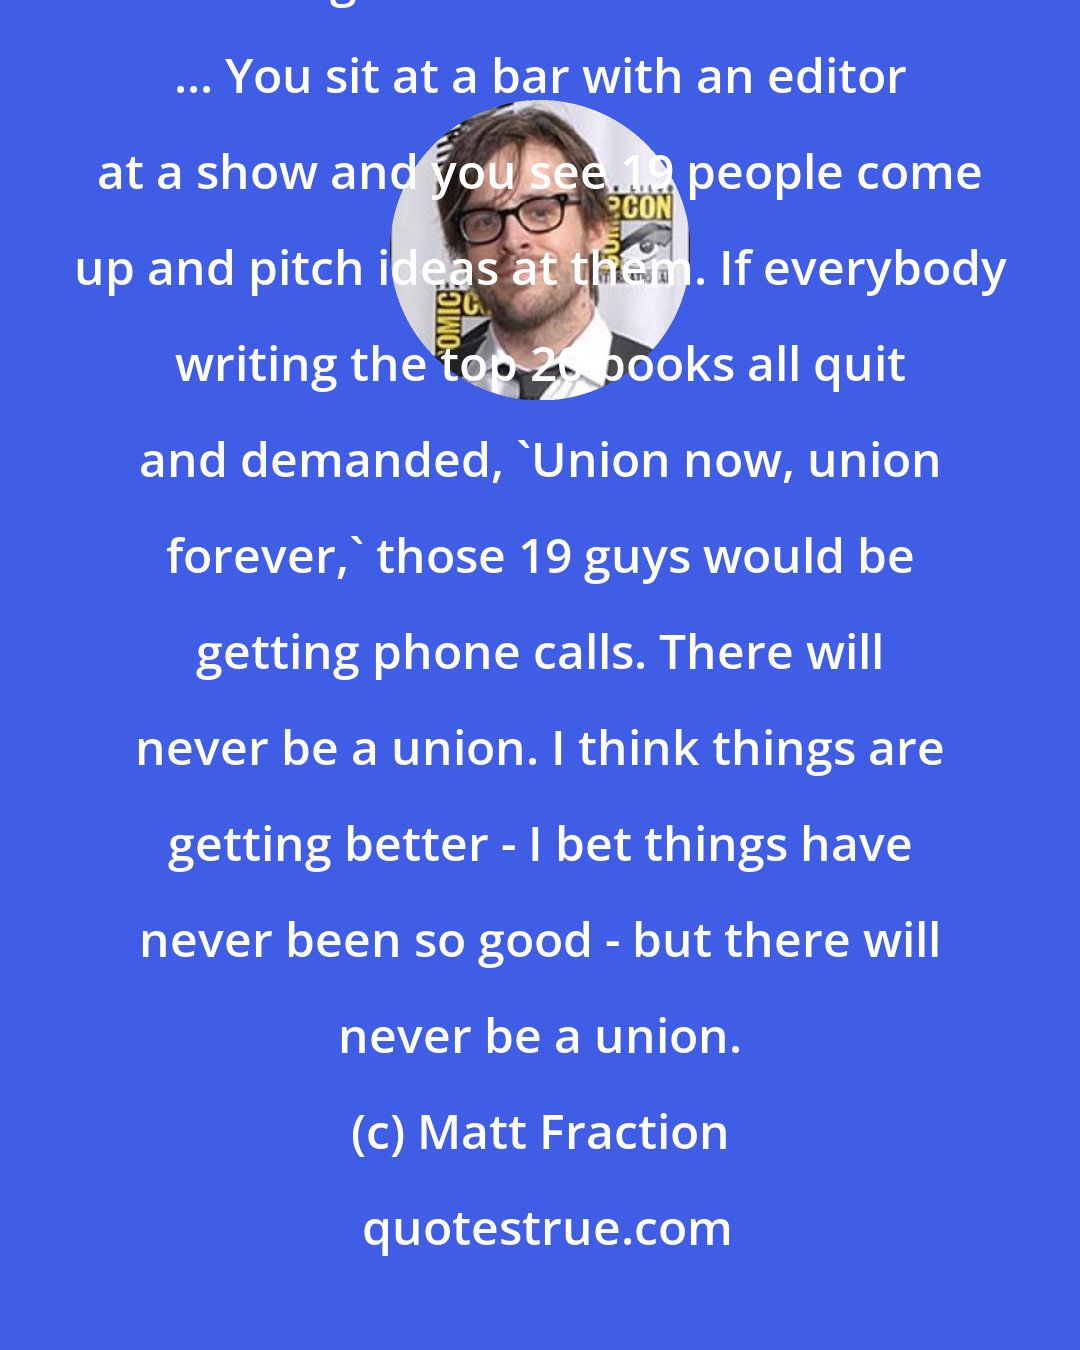 Matt Fraction: [A comic book writers' union] will never happen. Someone will always be willing to write Batman for free. ... You sit at a bar with an editor at a show and you see 19 people come up and pitch ideas at them. If everybody writing the top 20 books all quit and demanded, 'Union now, union forever,' those 19 guys would be getting phone calls. There will never be a union. I think things are getting better - I bet things have never been so good - but there will never be a union.